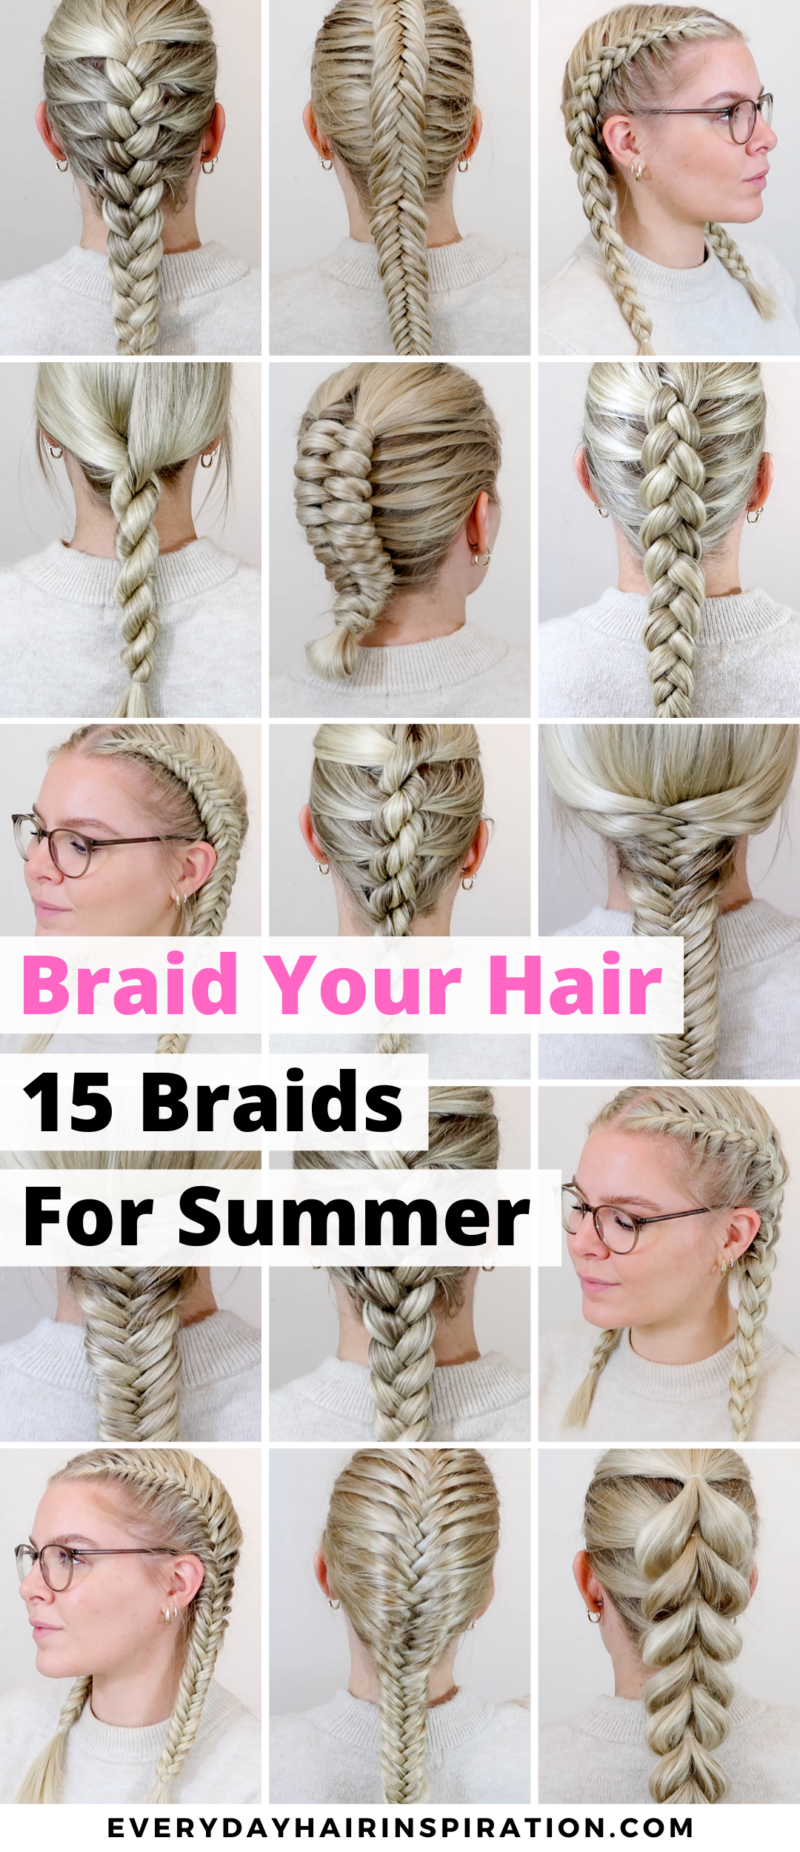 How To Braid Your Own Hair (15 Braids For Summer)